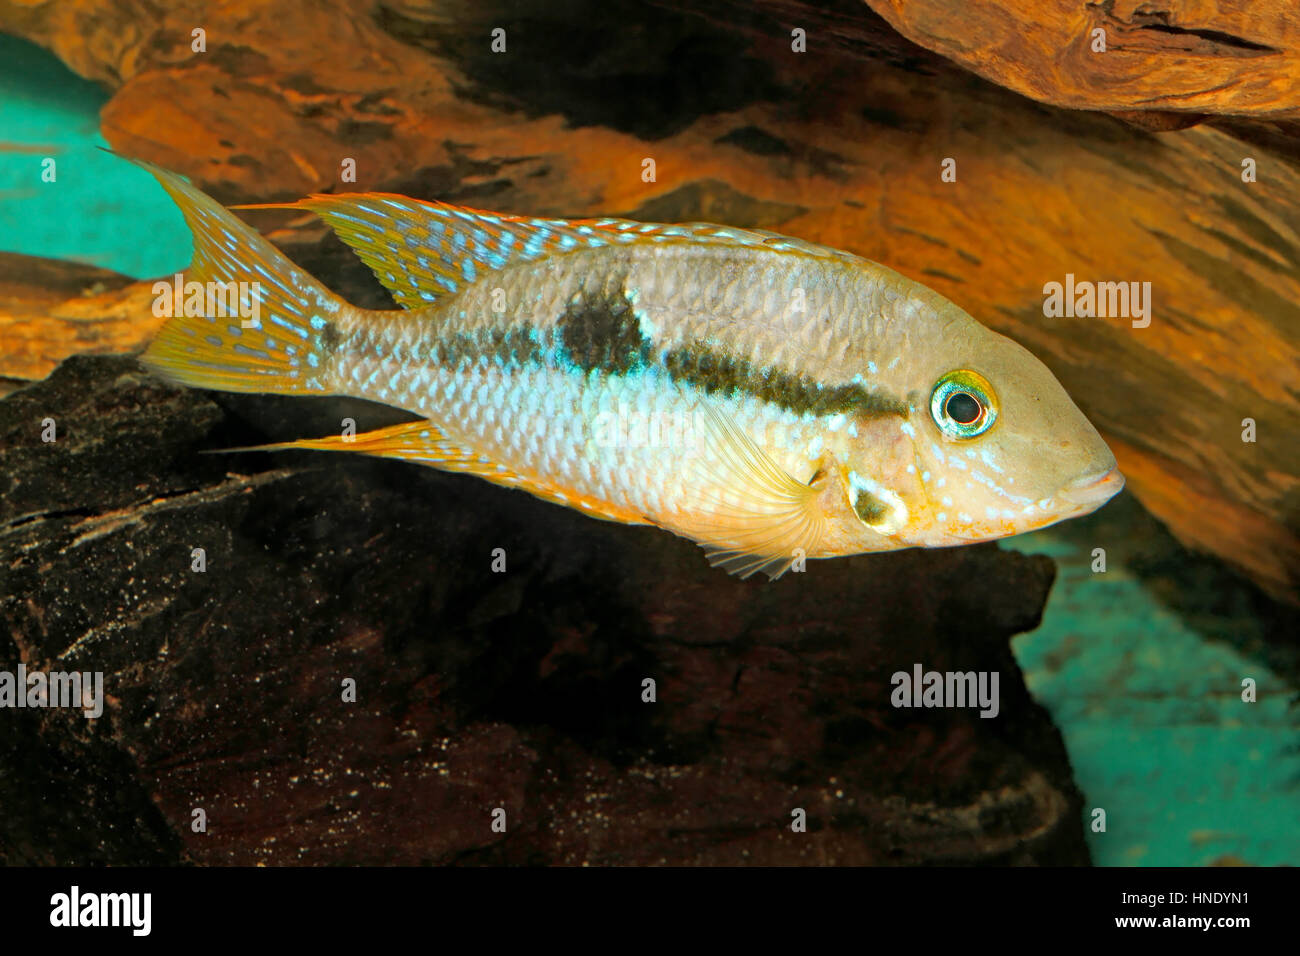 Yellow Fire Mouth (Thorichthys affinis) - female Stock Photo